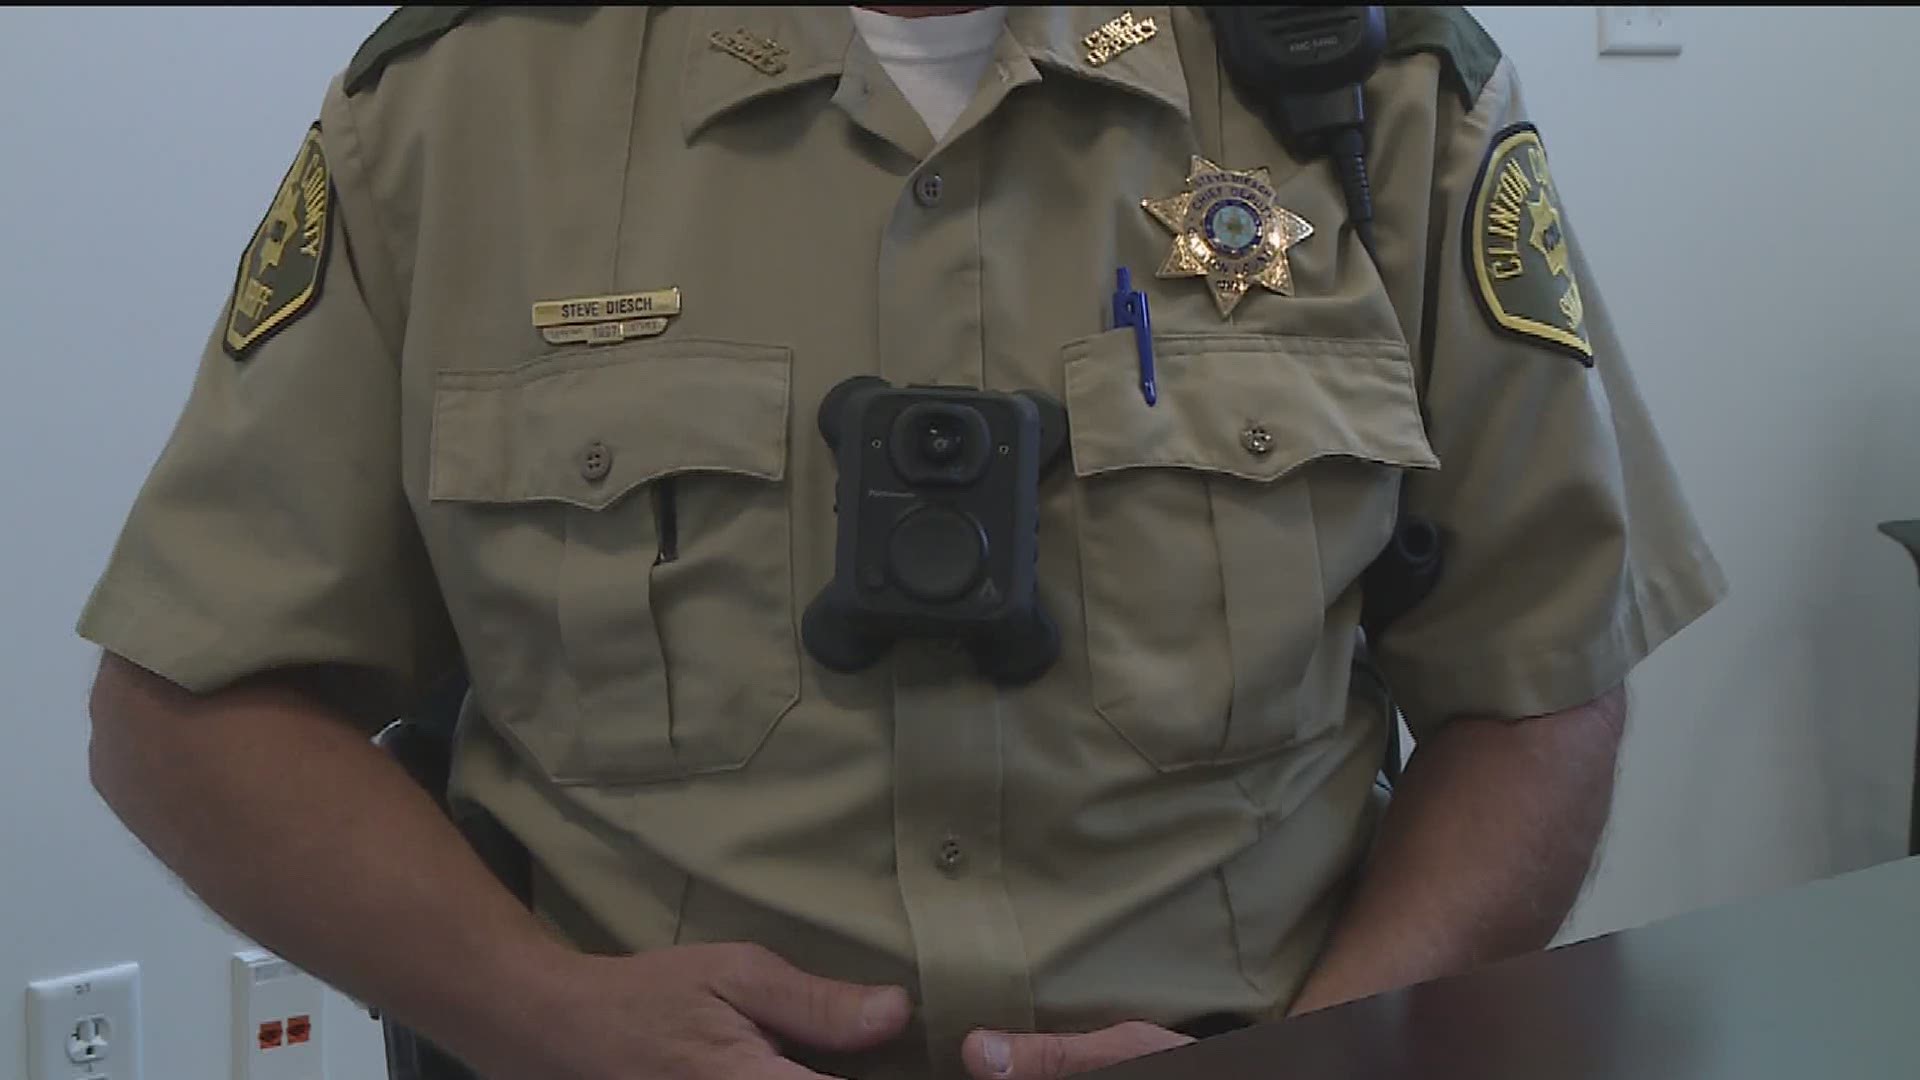 The body cameras are worn on the deputies chests and record the calls that they are on.